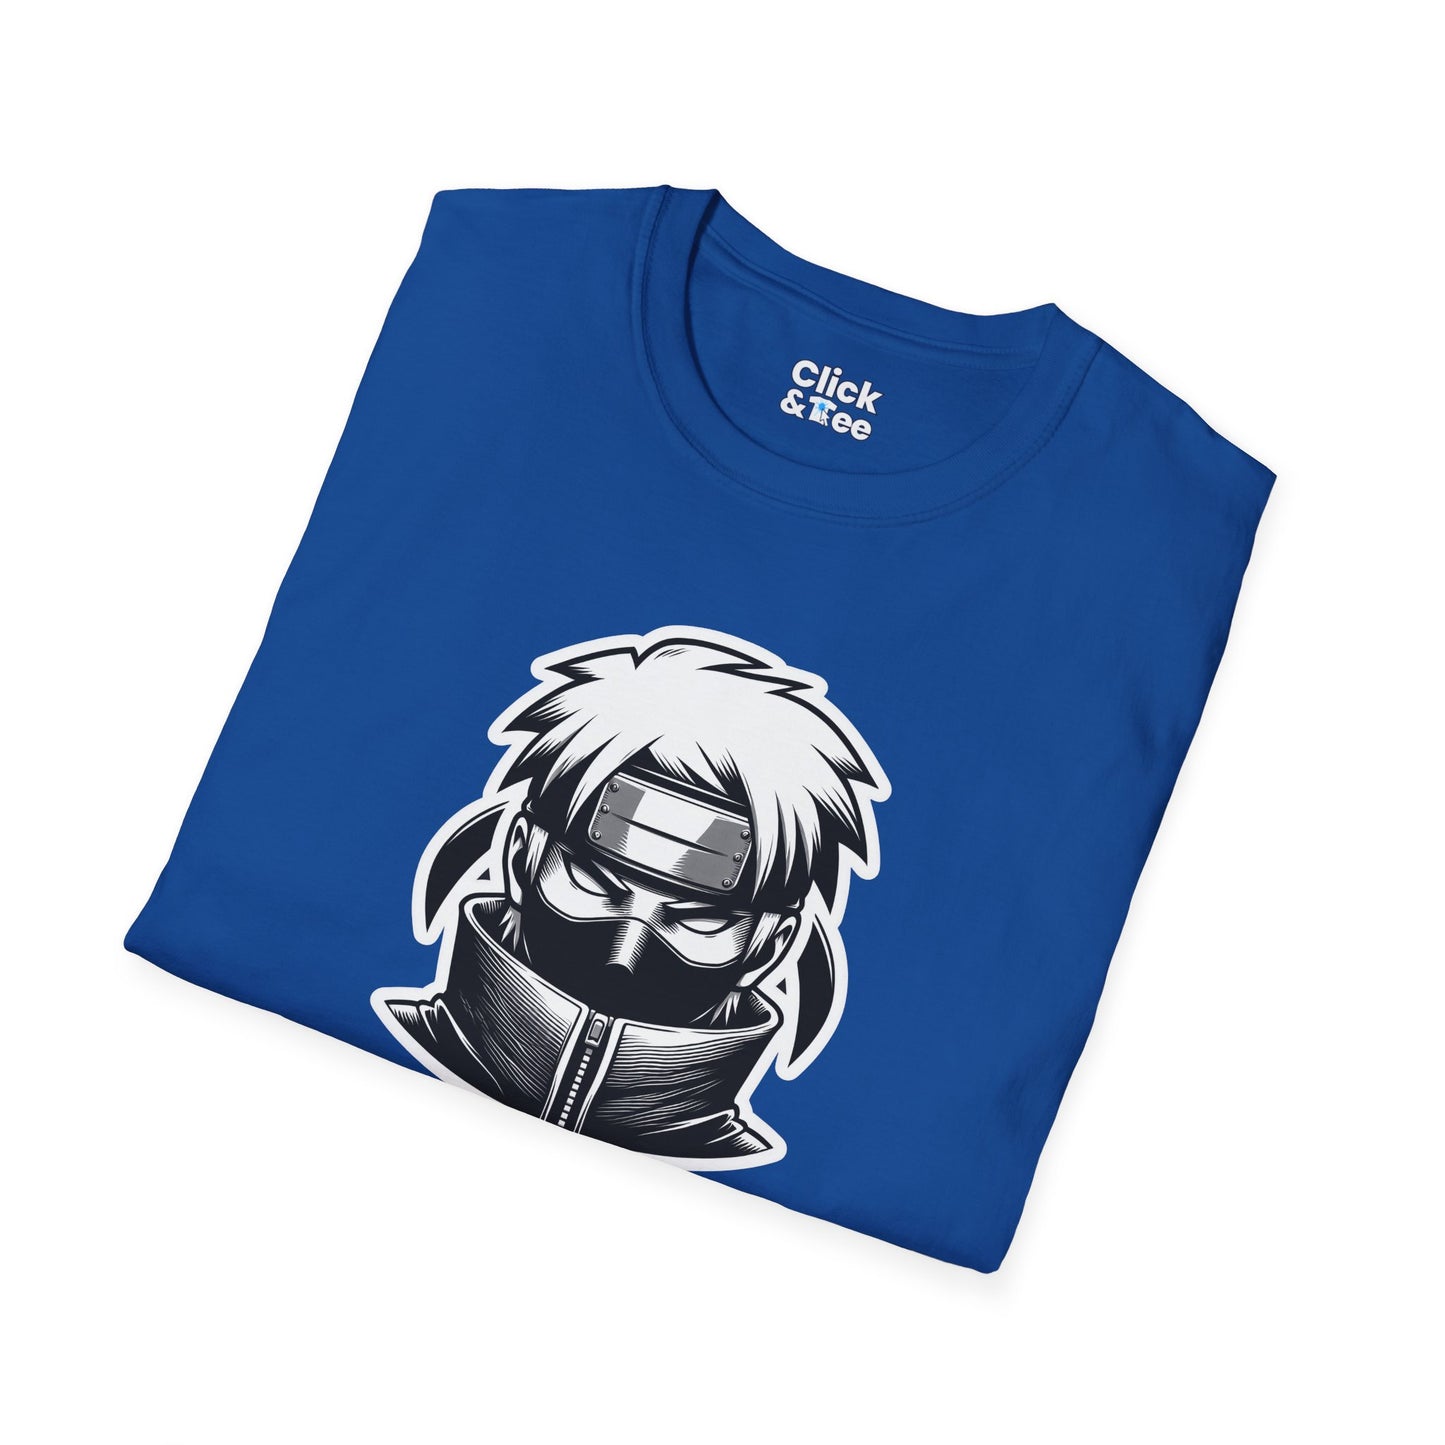 Unique T-Shirt - Invisible Ninja Ready to attack - Shonen Anime Style T-Shirt